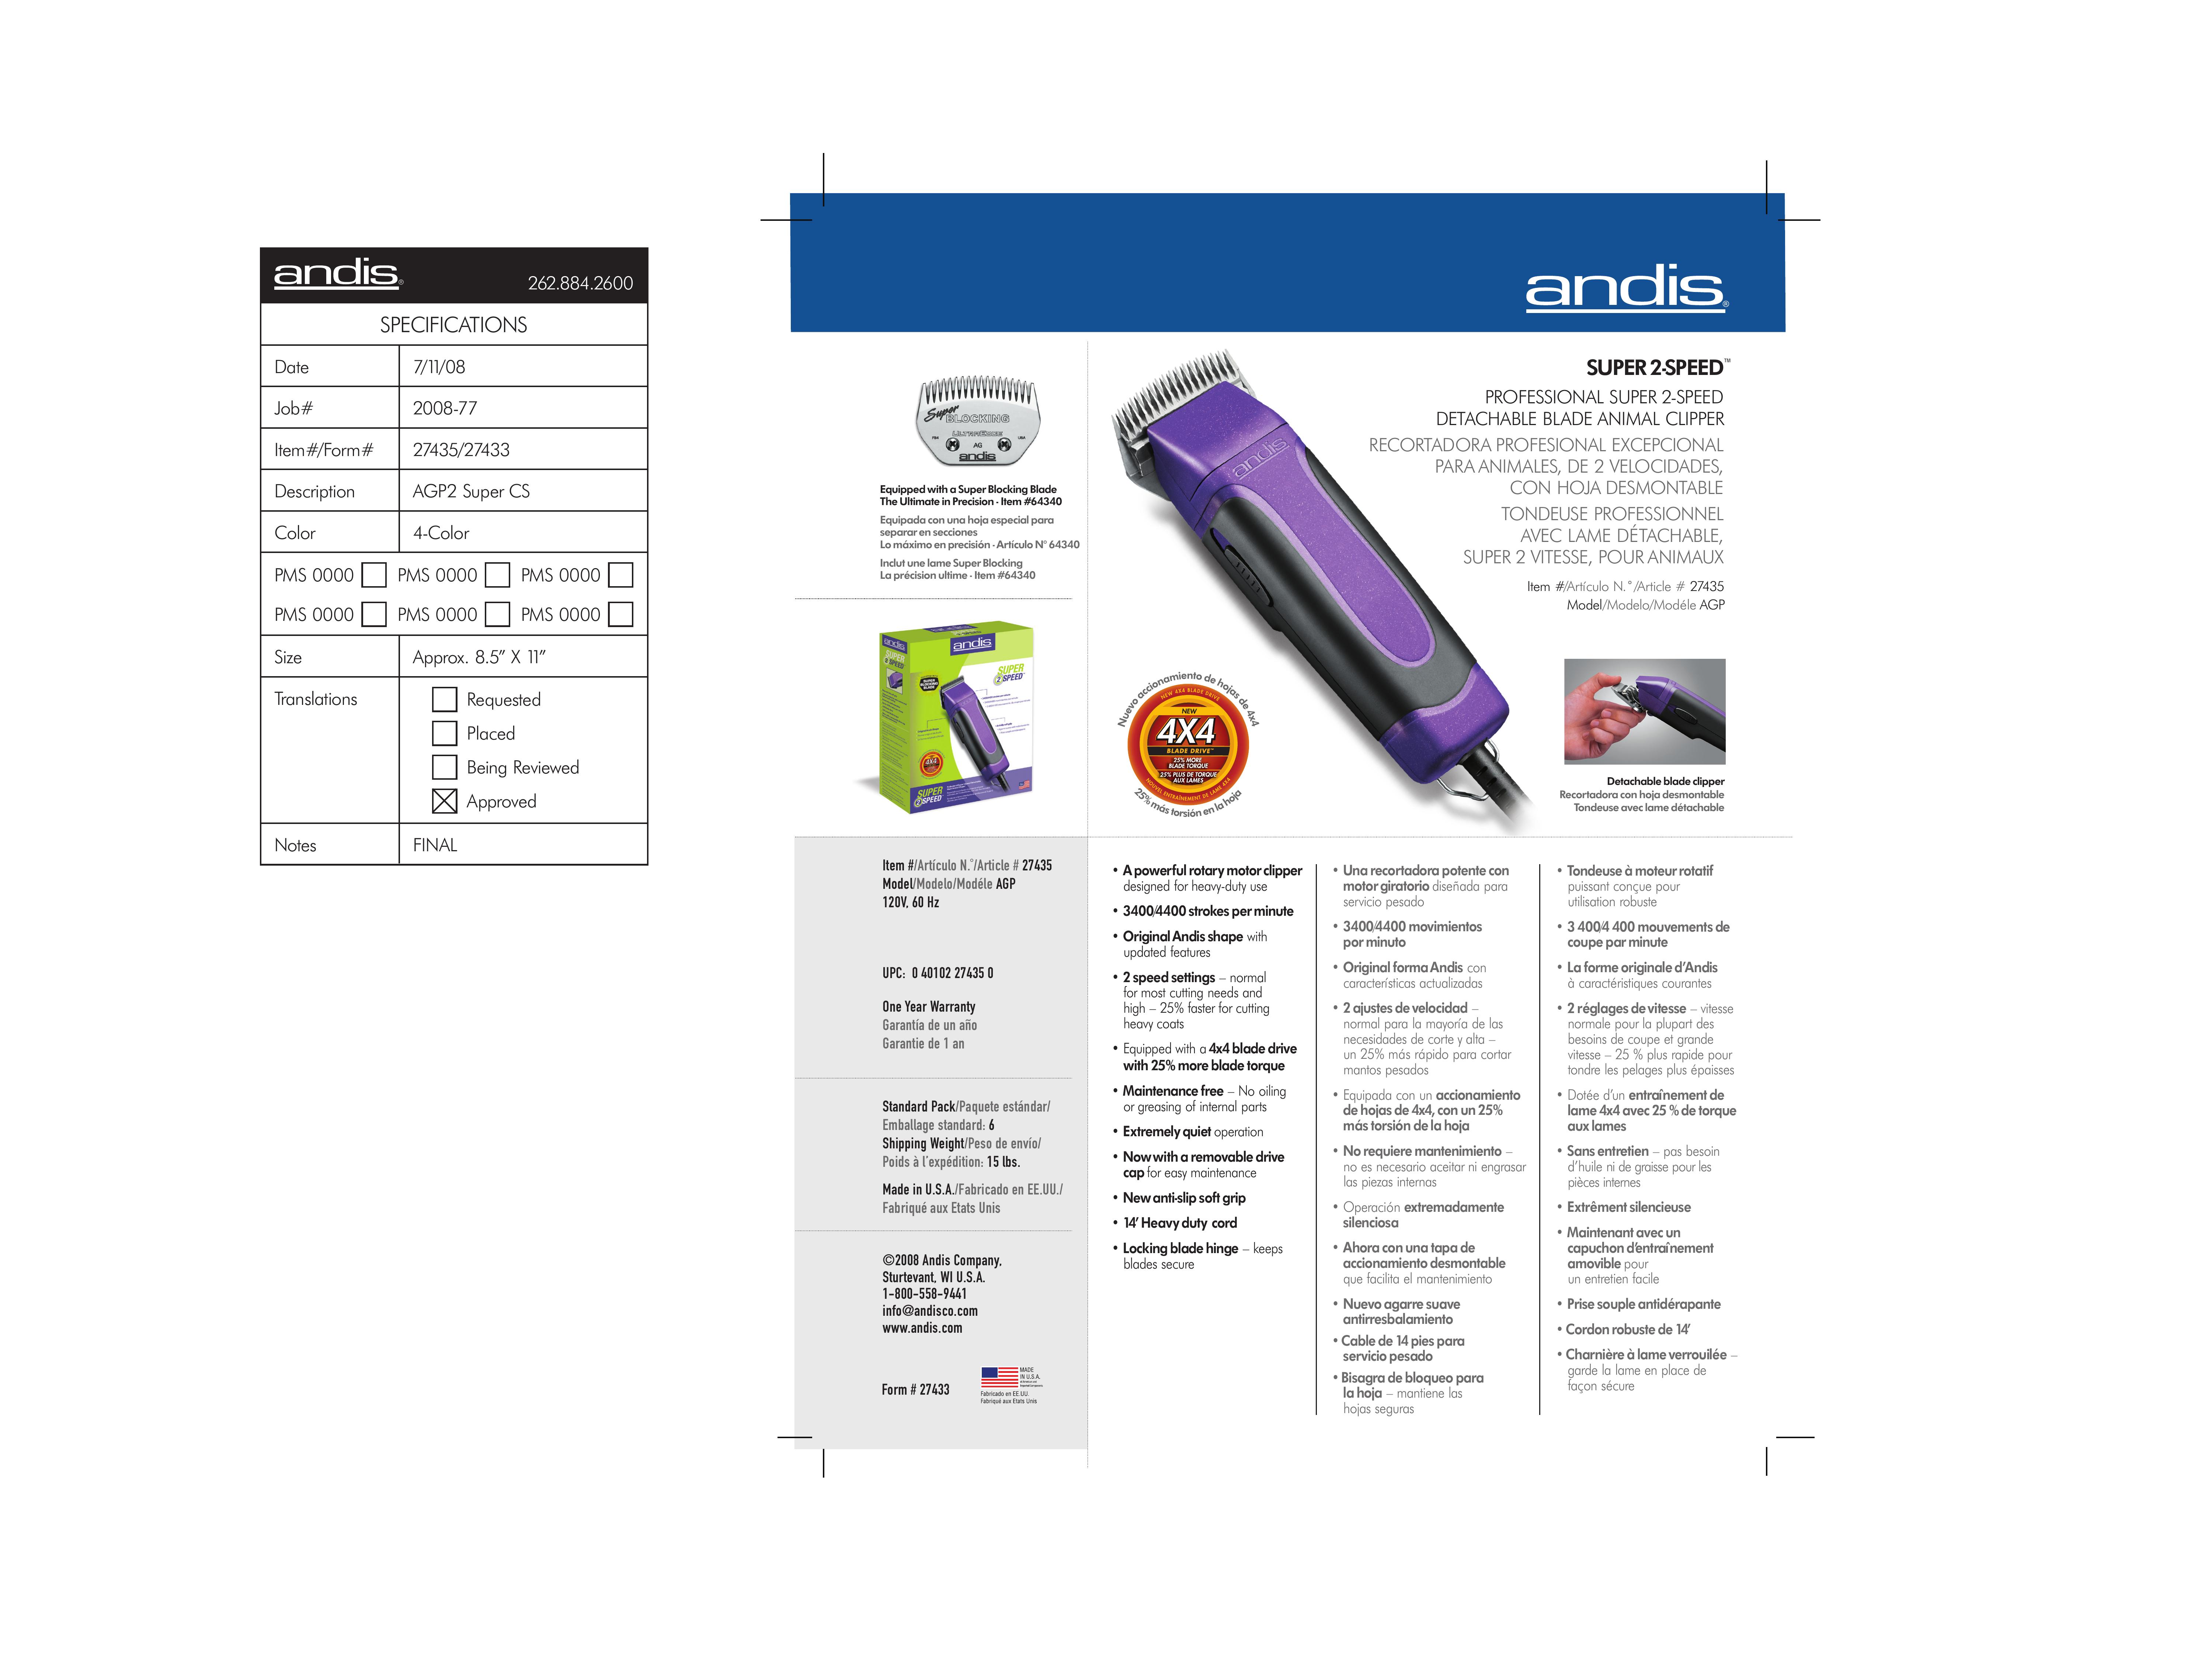 Andis Company AGP Hair Clippers User Manual